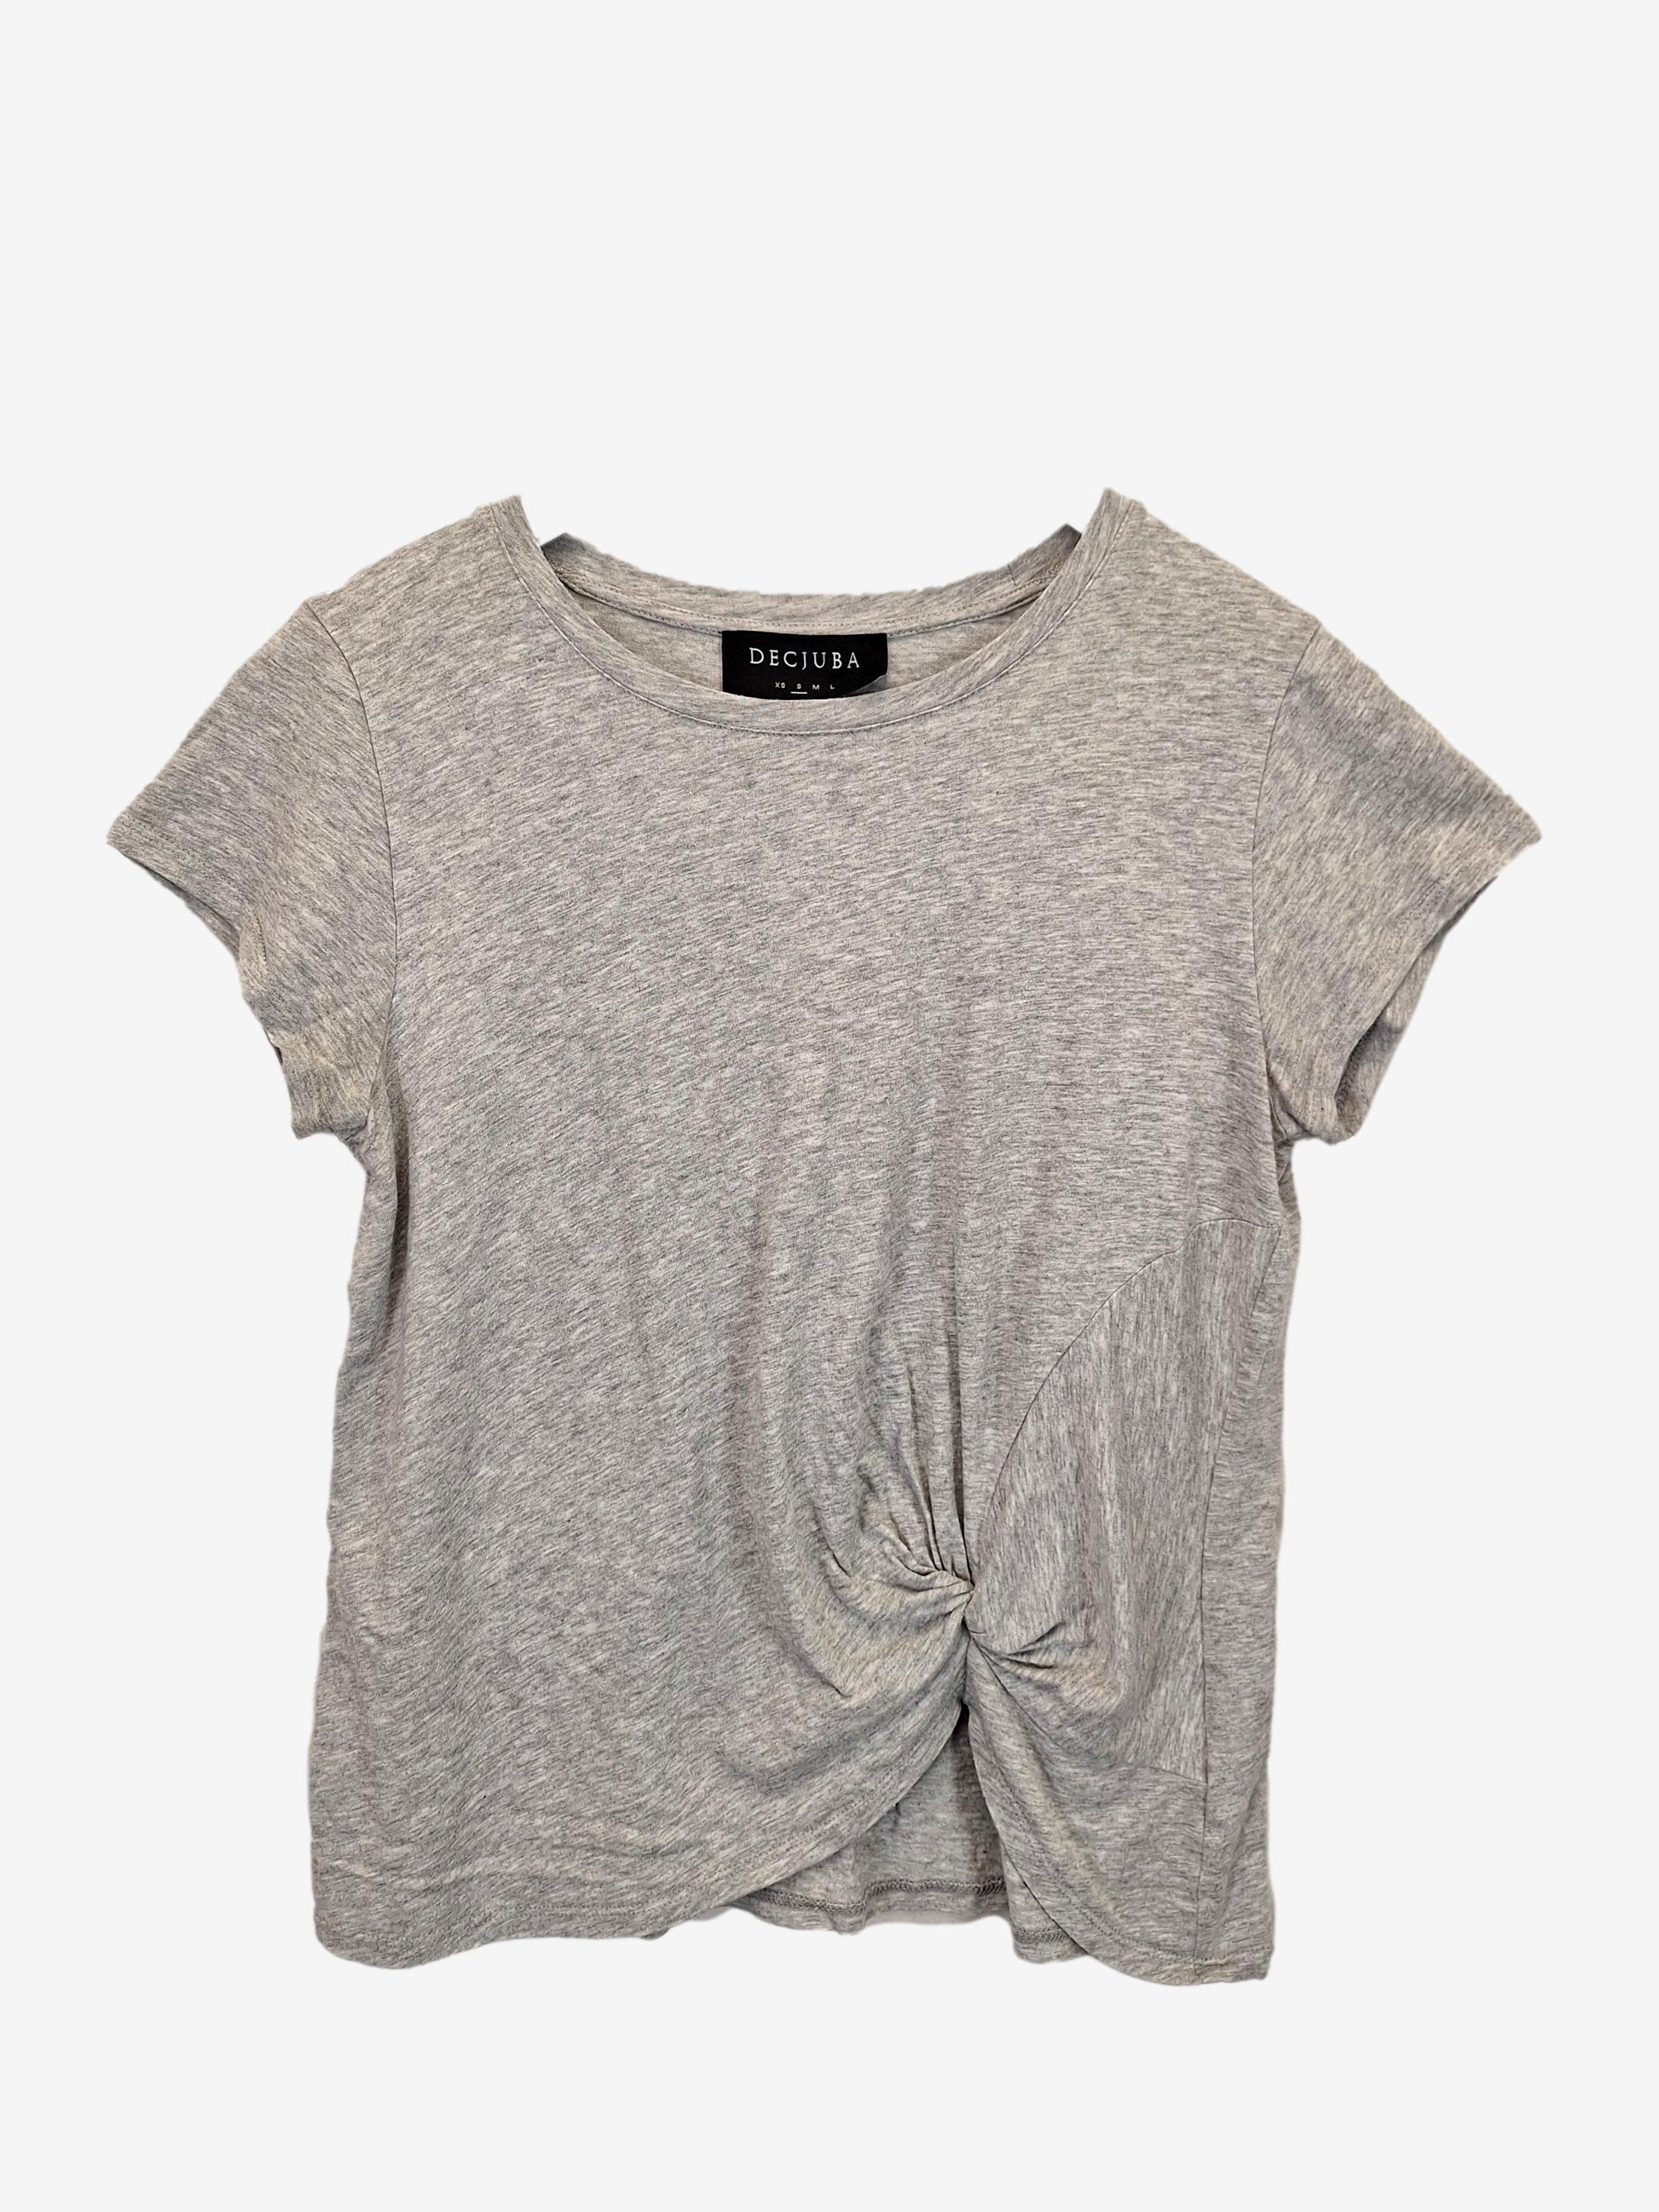 Decjuba Knot Basic T-shirt Size S by SwapUp-Online Second Hand Store-Online Thrift Store